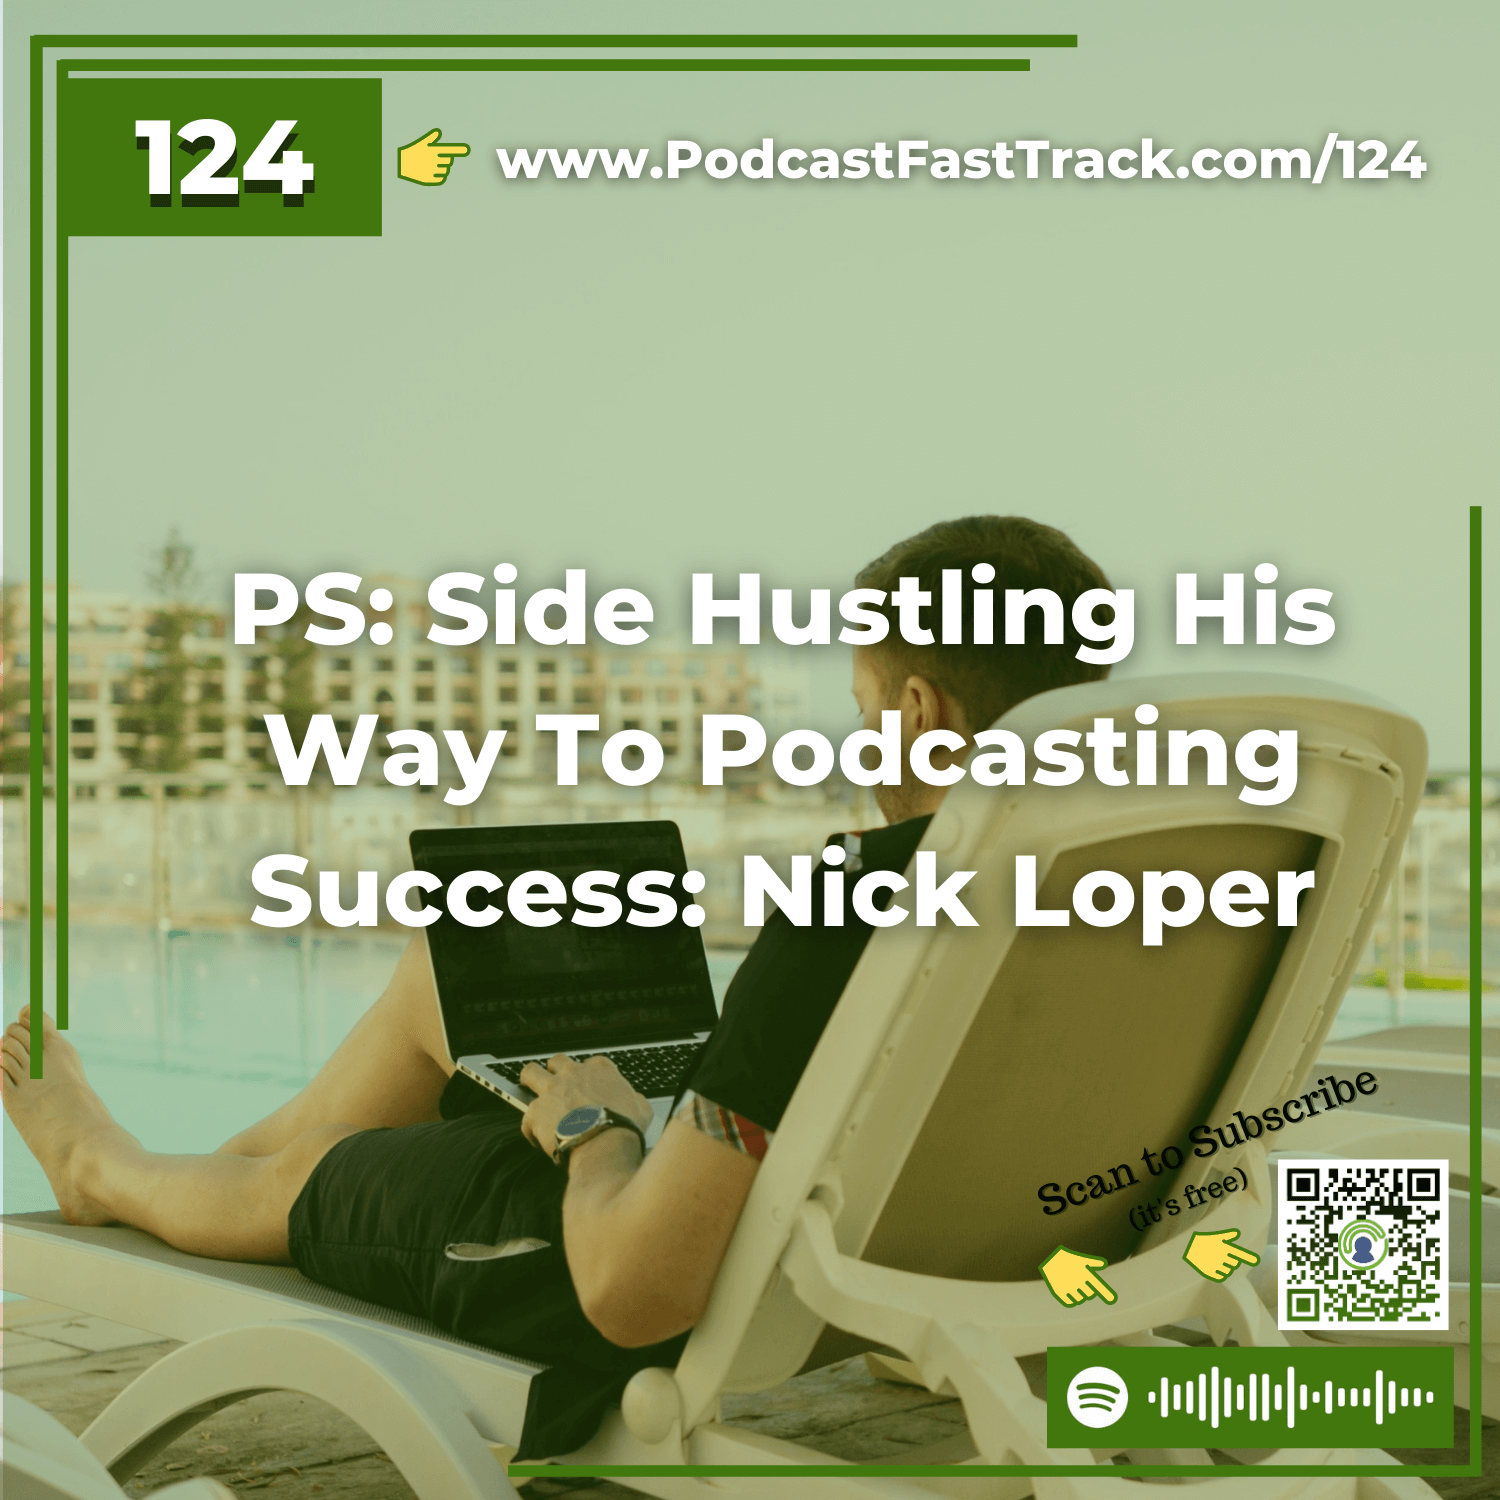 124: PS: Side Hustling His Way To Podcasting Success: Nick Loper